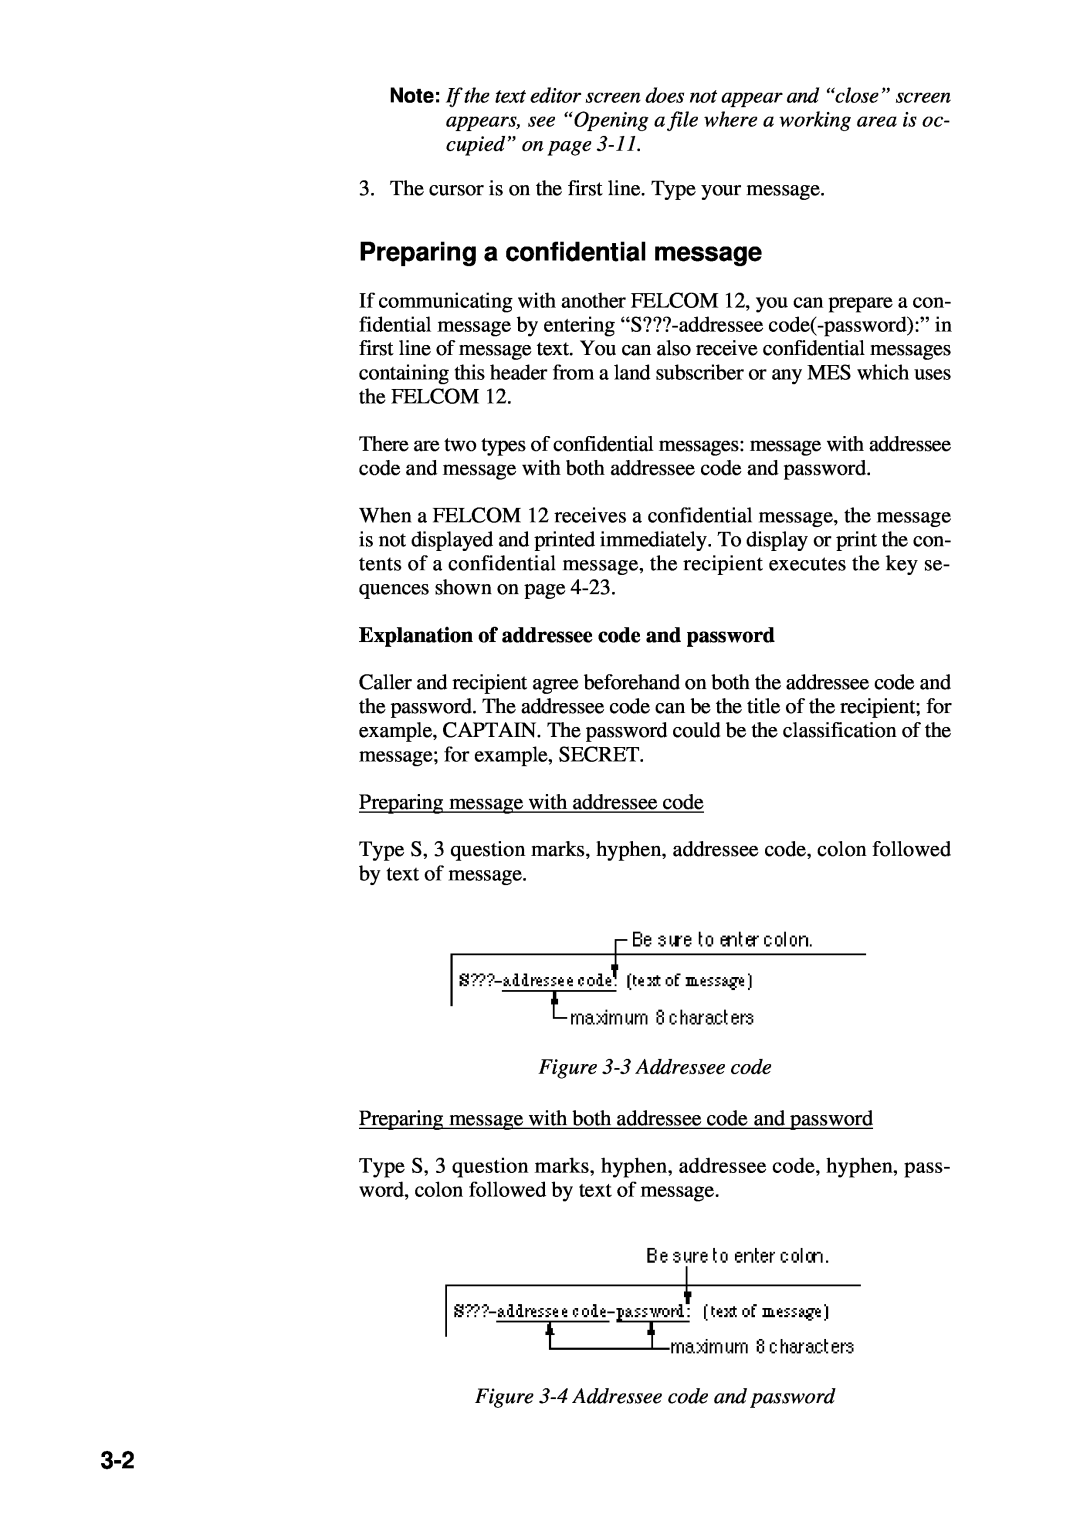 Furuno RC-1500-1T manual Preparing a confidential message, Explanation of addressee code and password, 3 Addressee code 